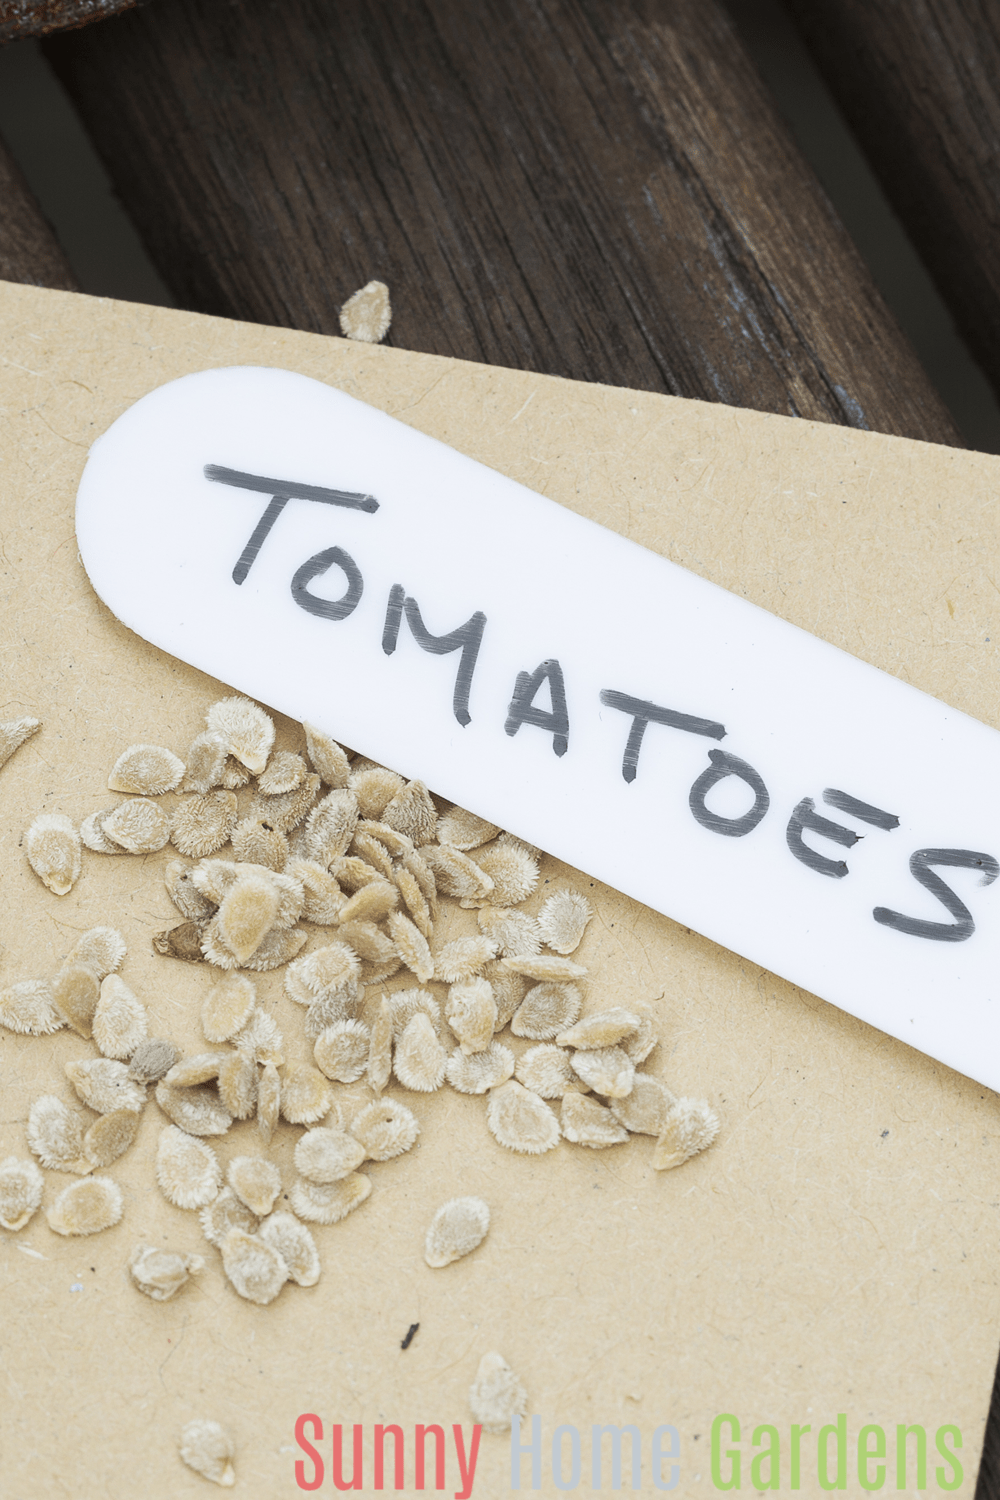 Tomato Seeds on seed envelope with label